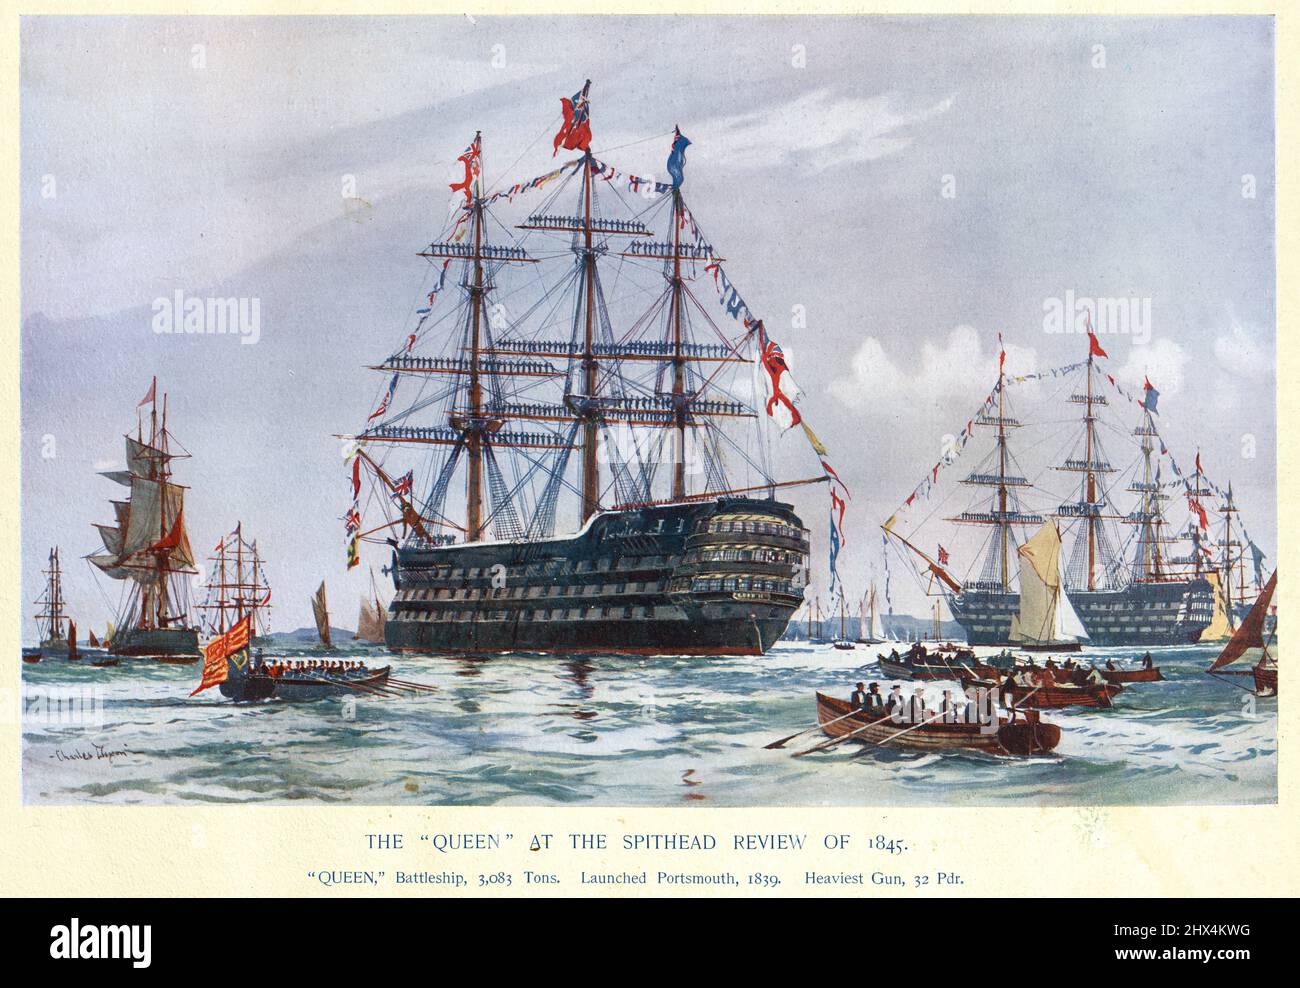 HMS Queen (1839) at Spithead review of 1845. HMS Queen was a 110-gun first-rate ship of the line of the Royal Navy. She was the last purely sailing built battleship to be ordered. Stock Photo